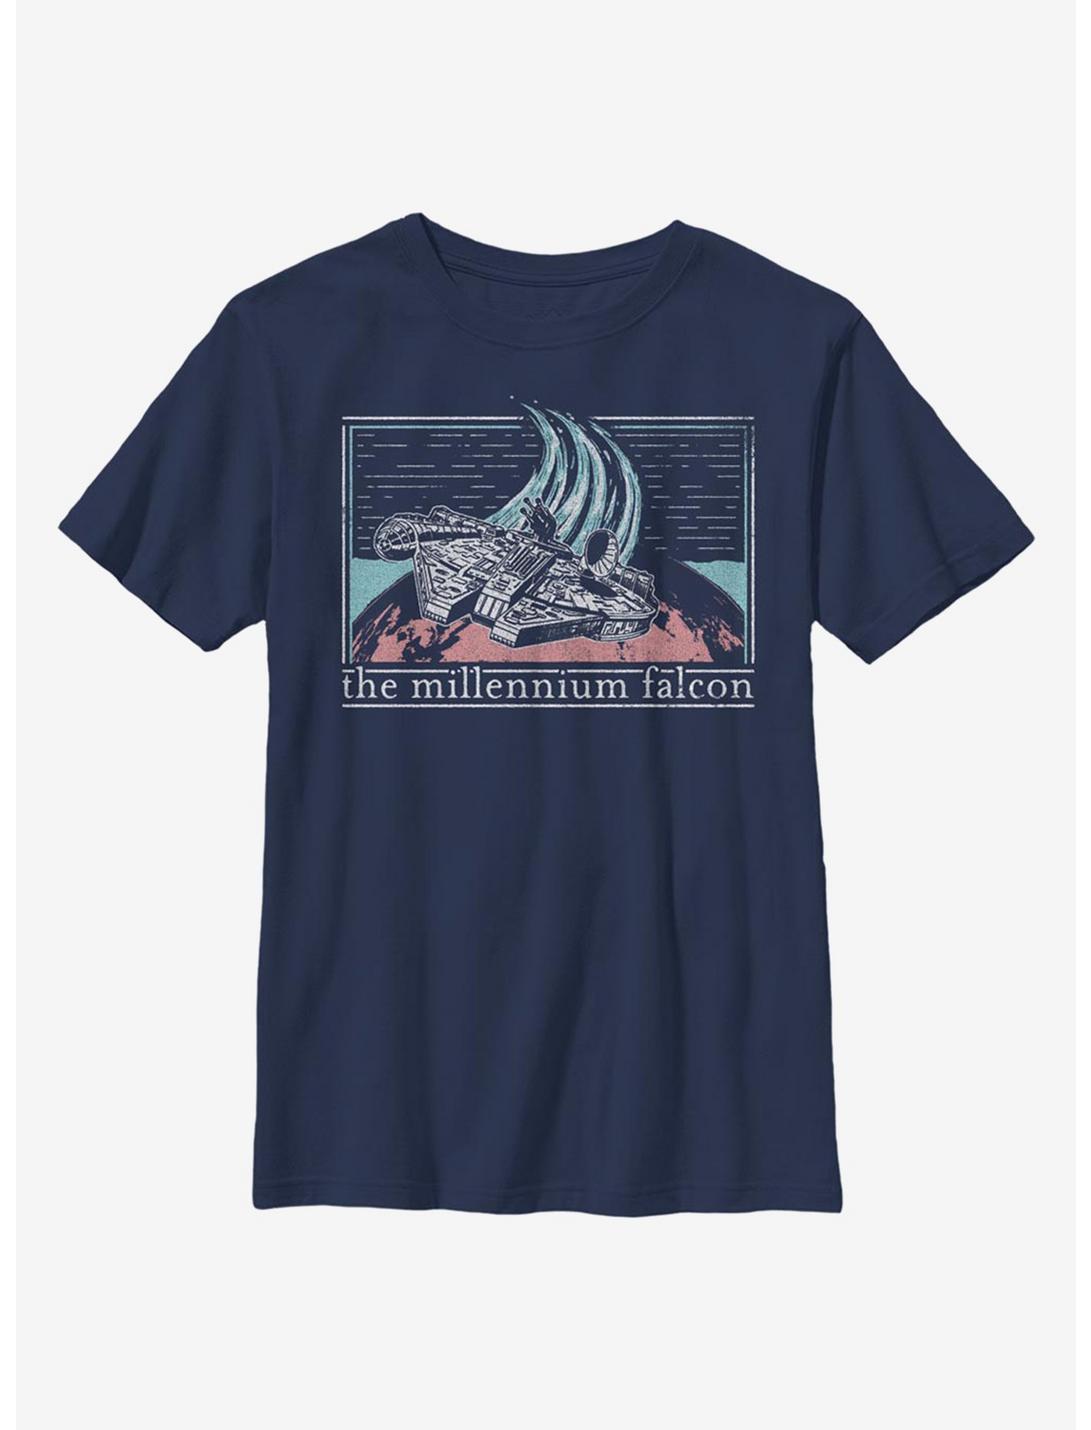 Star Wars Falcon Flyby Youth T-Shirt, NAVY, hi-res